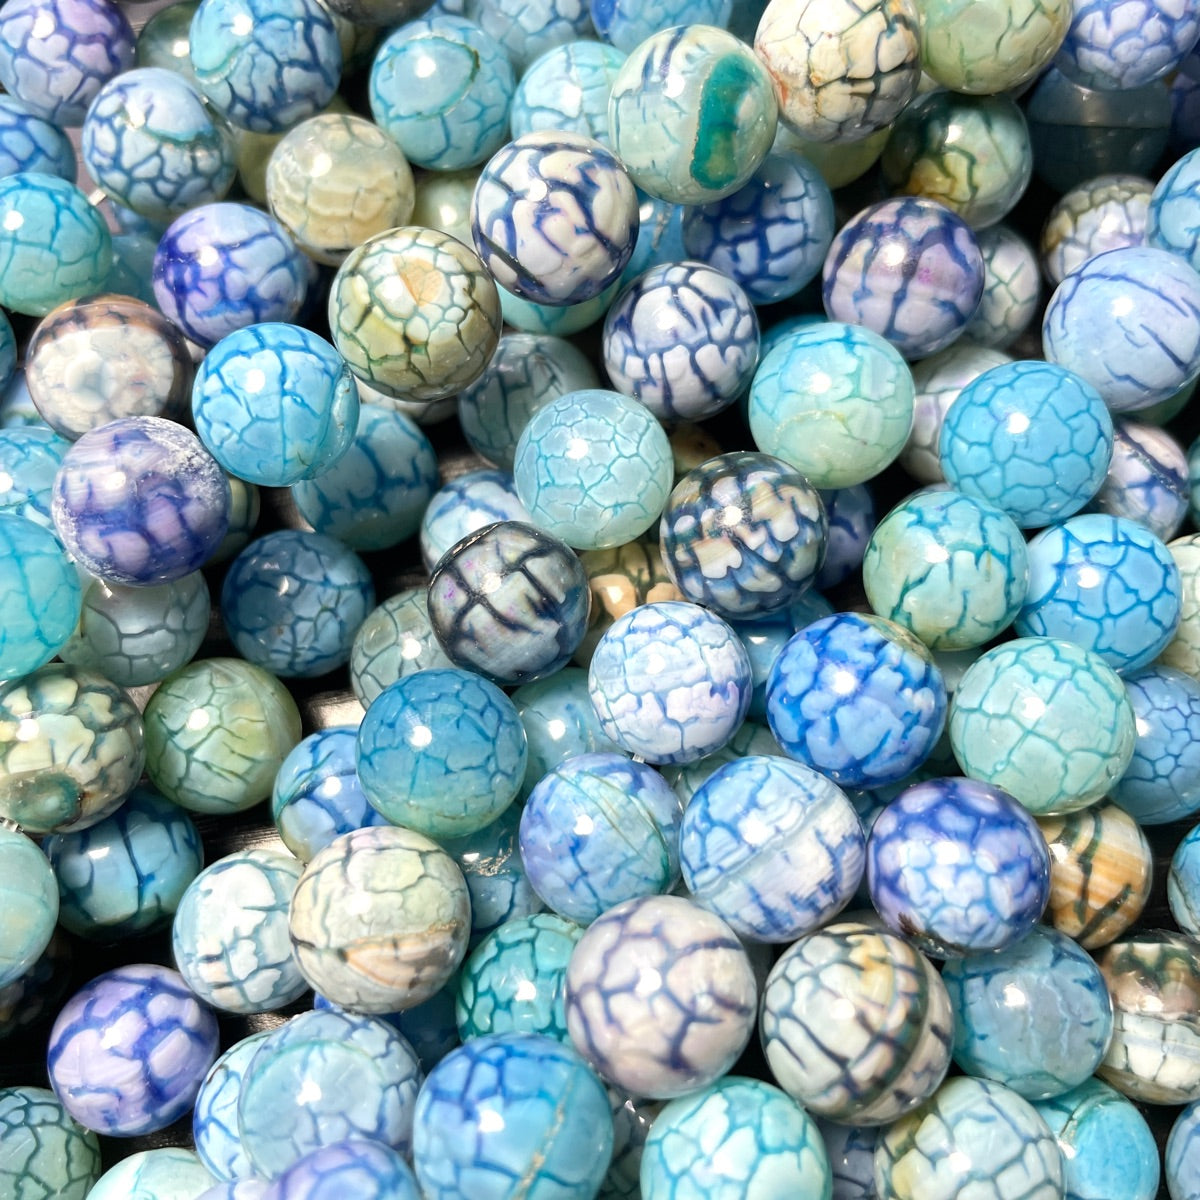 2 Strands/lot 12mm Colorful Cracked Fire Agate Round Stone Beads Light Blue Stone Beads New Beads Arrivals Round Agate Beads Charms Beads Beyond